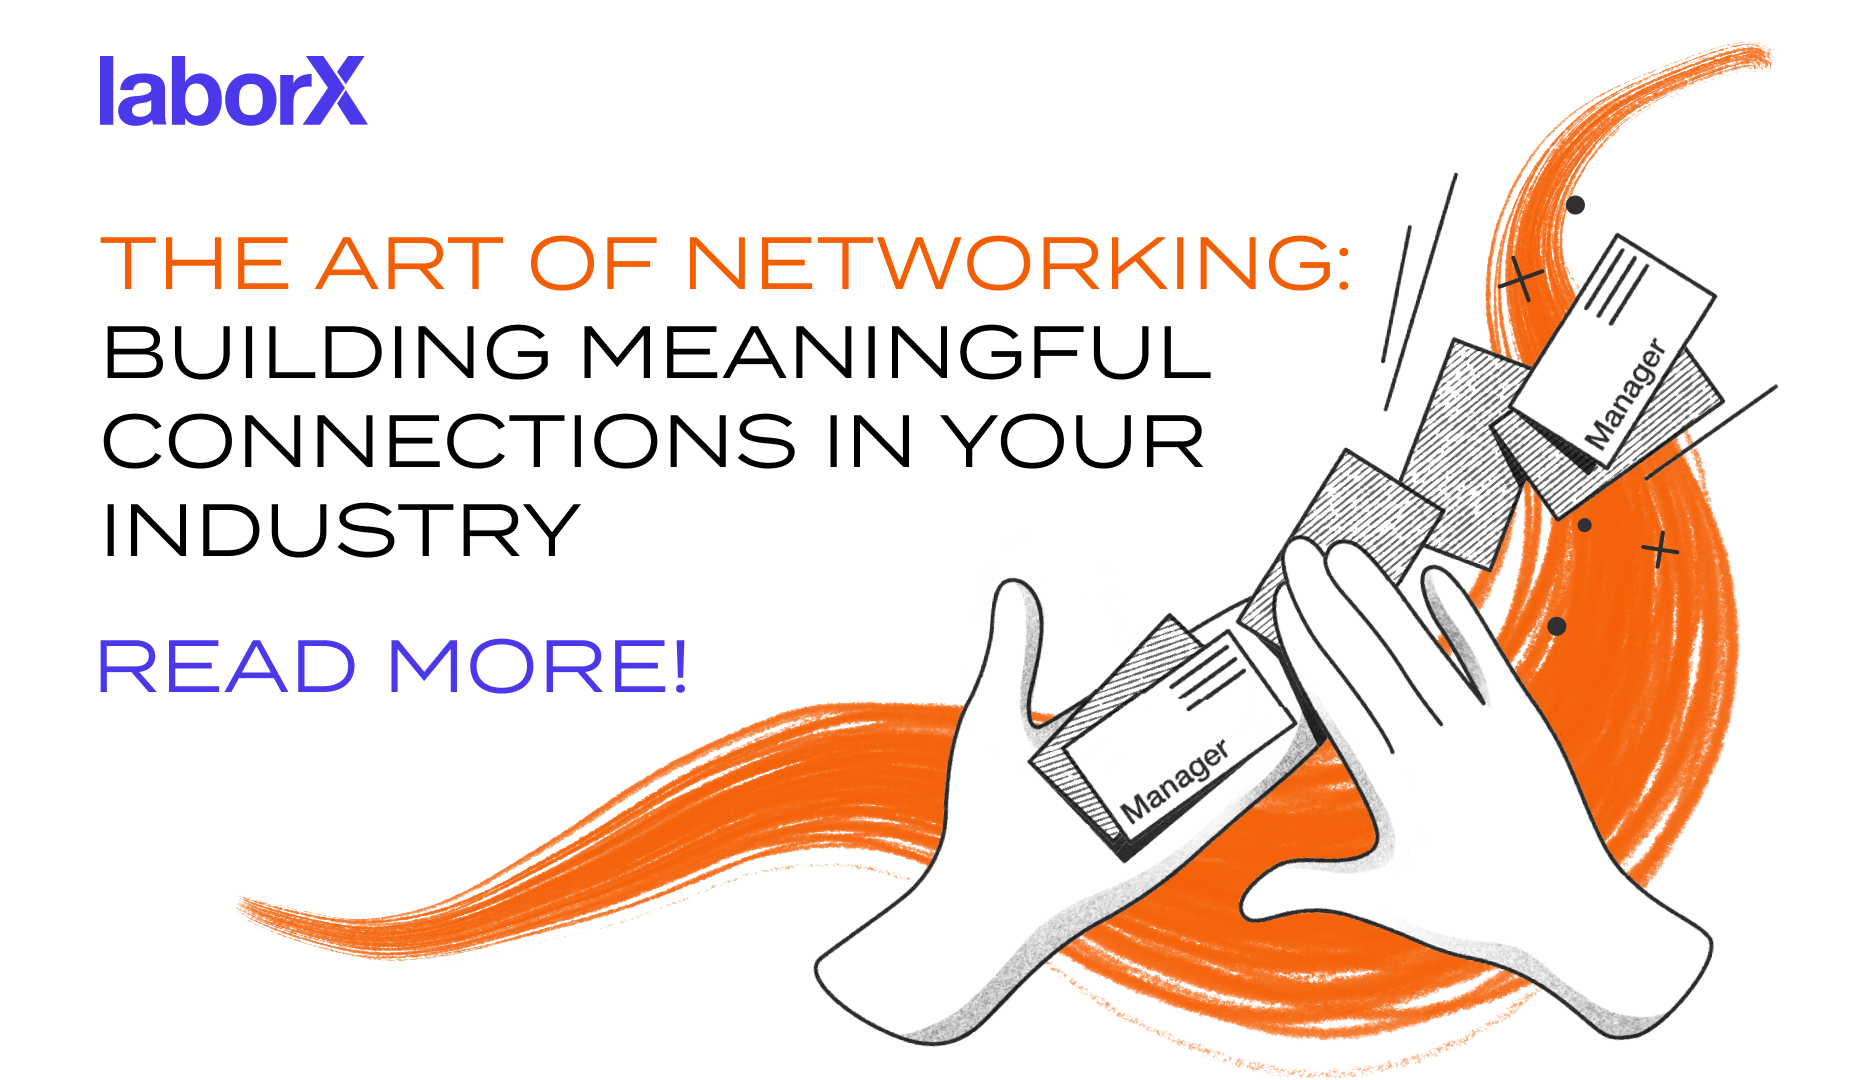 The Art Of Networking: Building Meaningful Connections In Your Industry